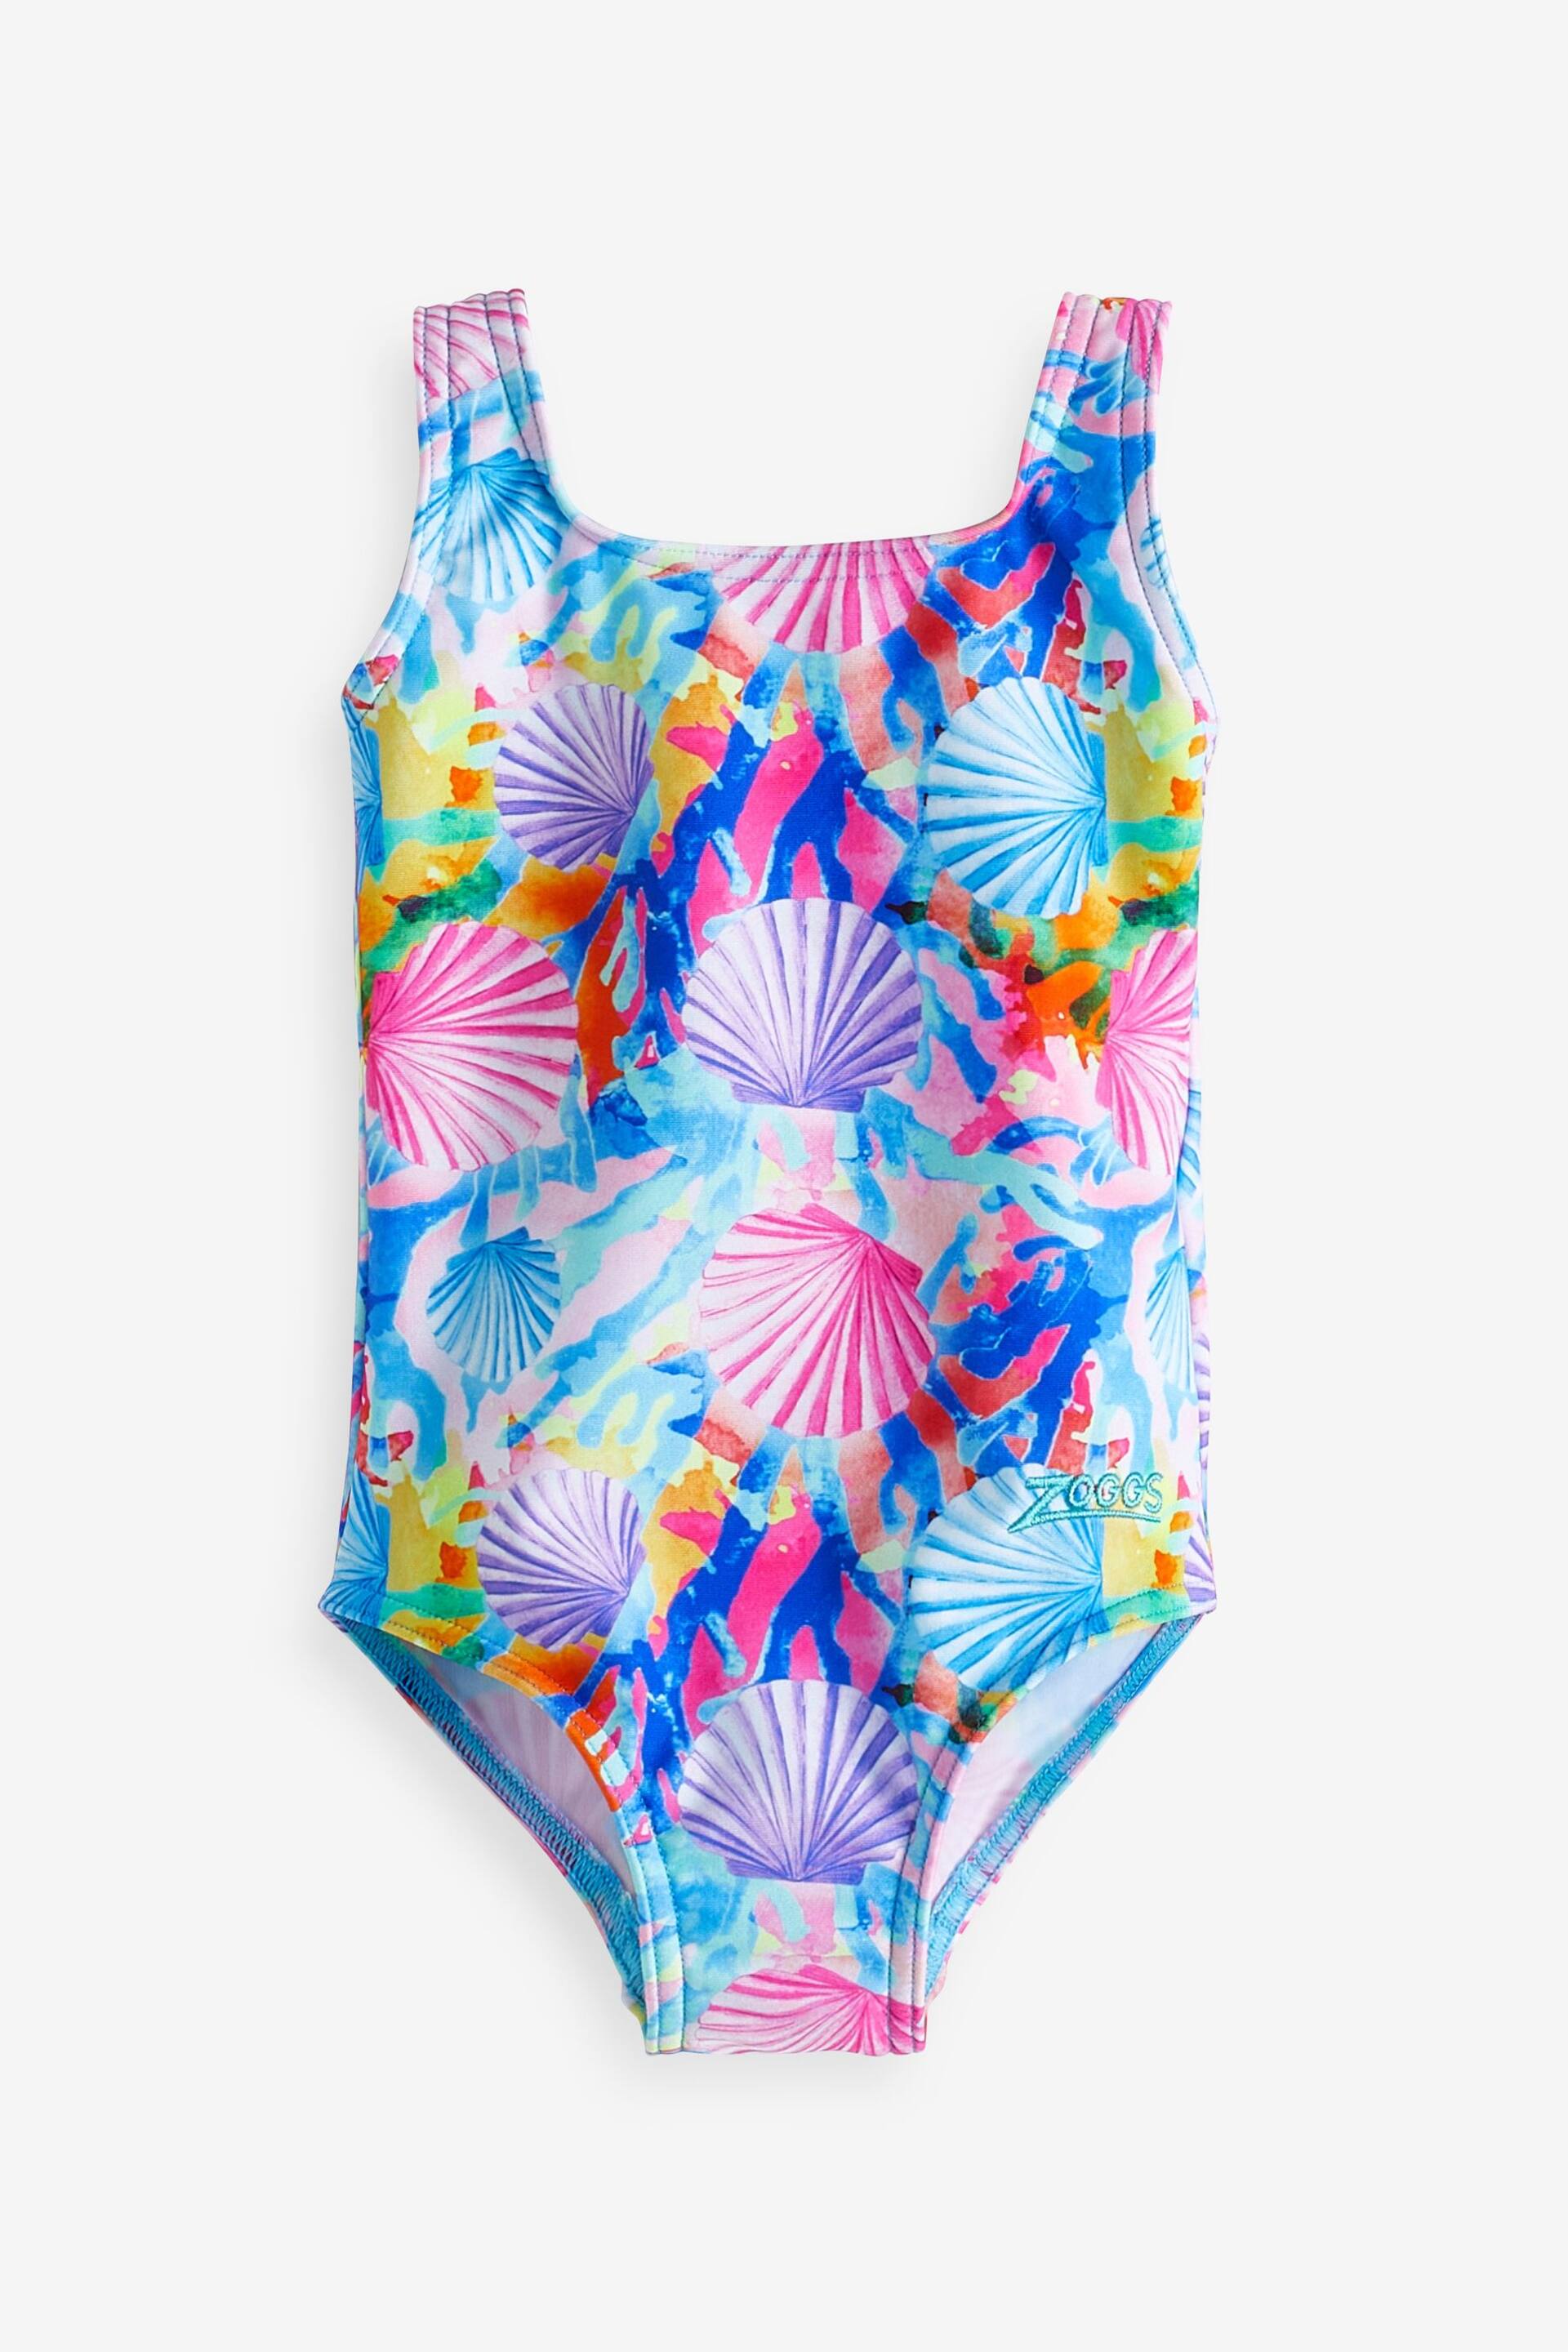 Zoggs Girls Scoopback One Piece Swimsuit - Image 5 of 7